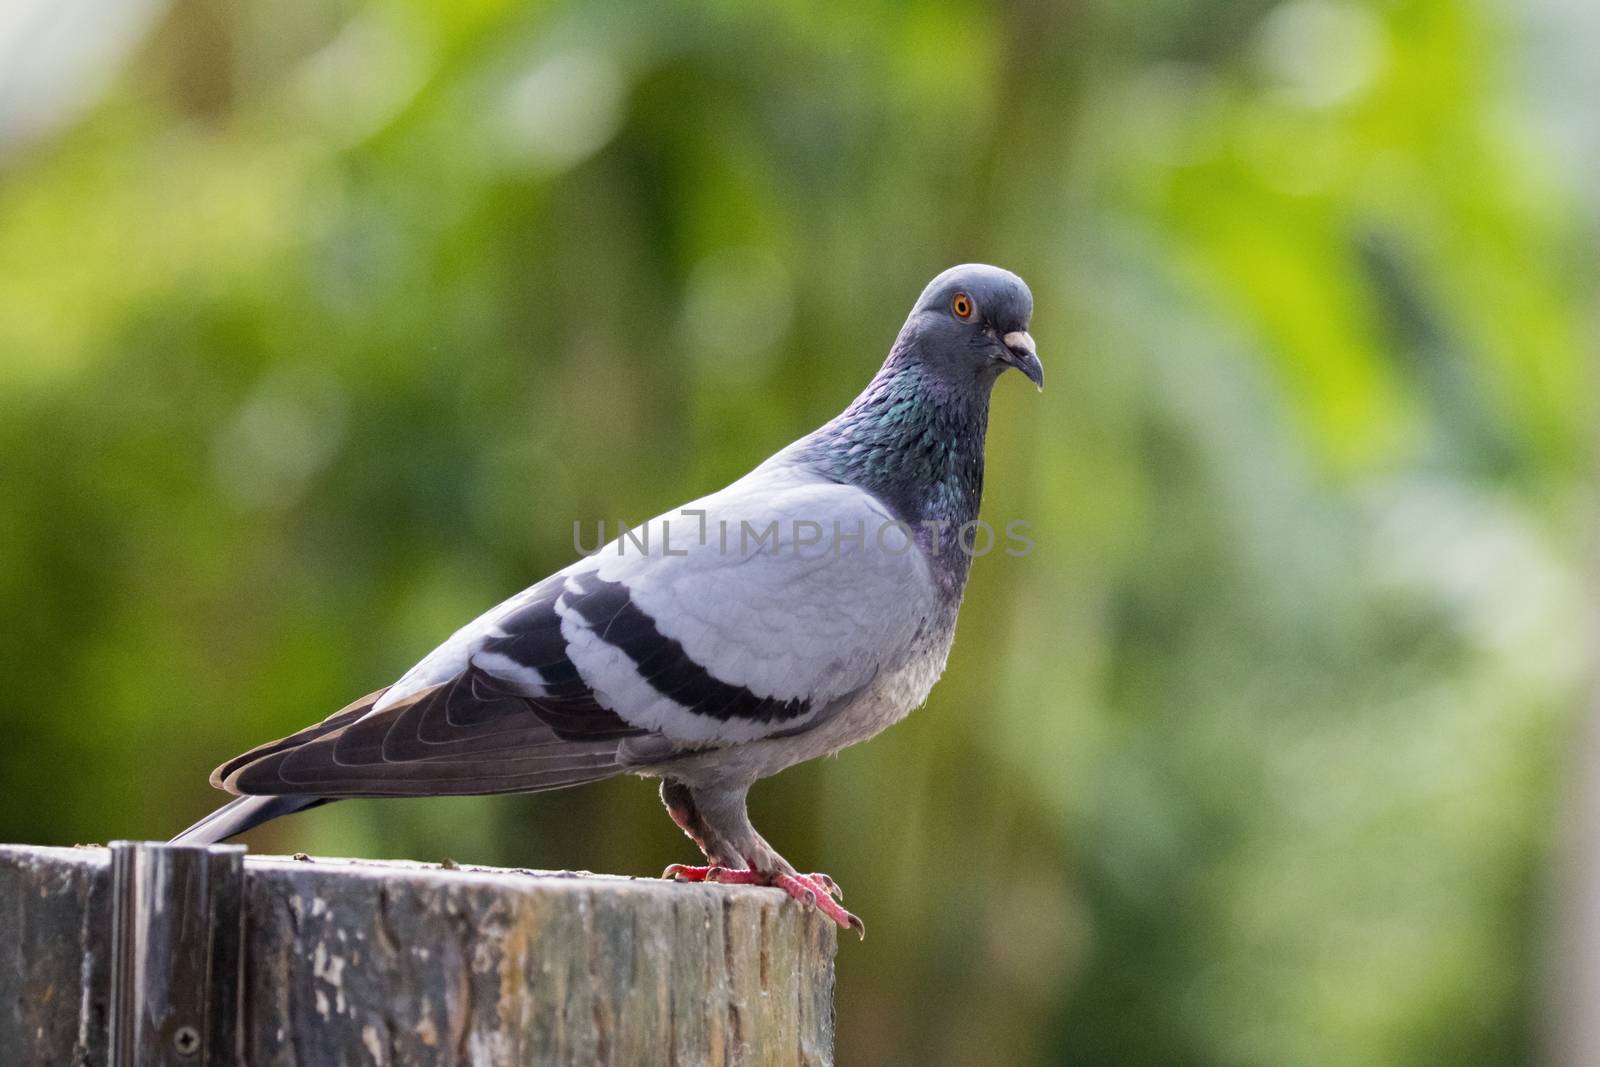 Image of a pigeon on nature background in thailand. Wild Animals by yod67